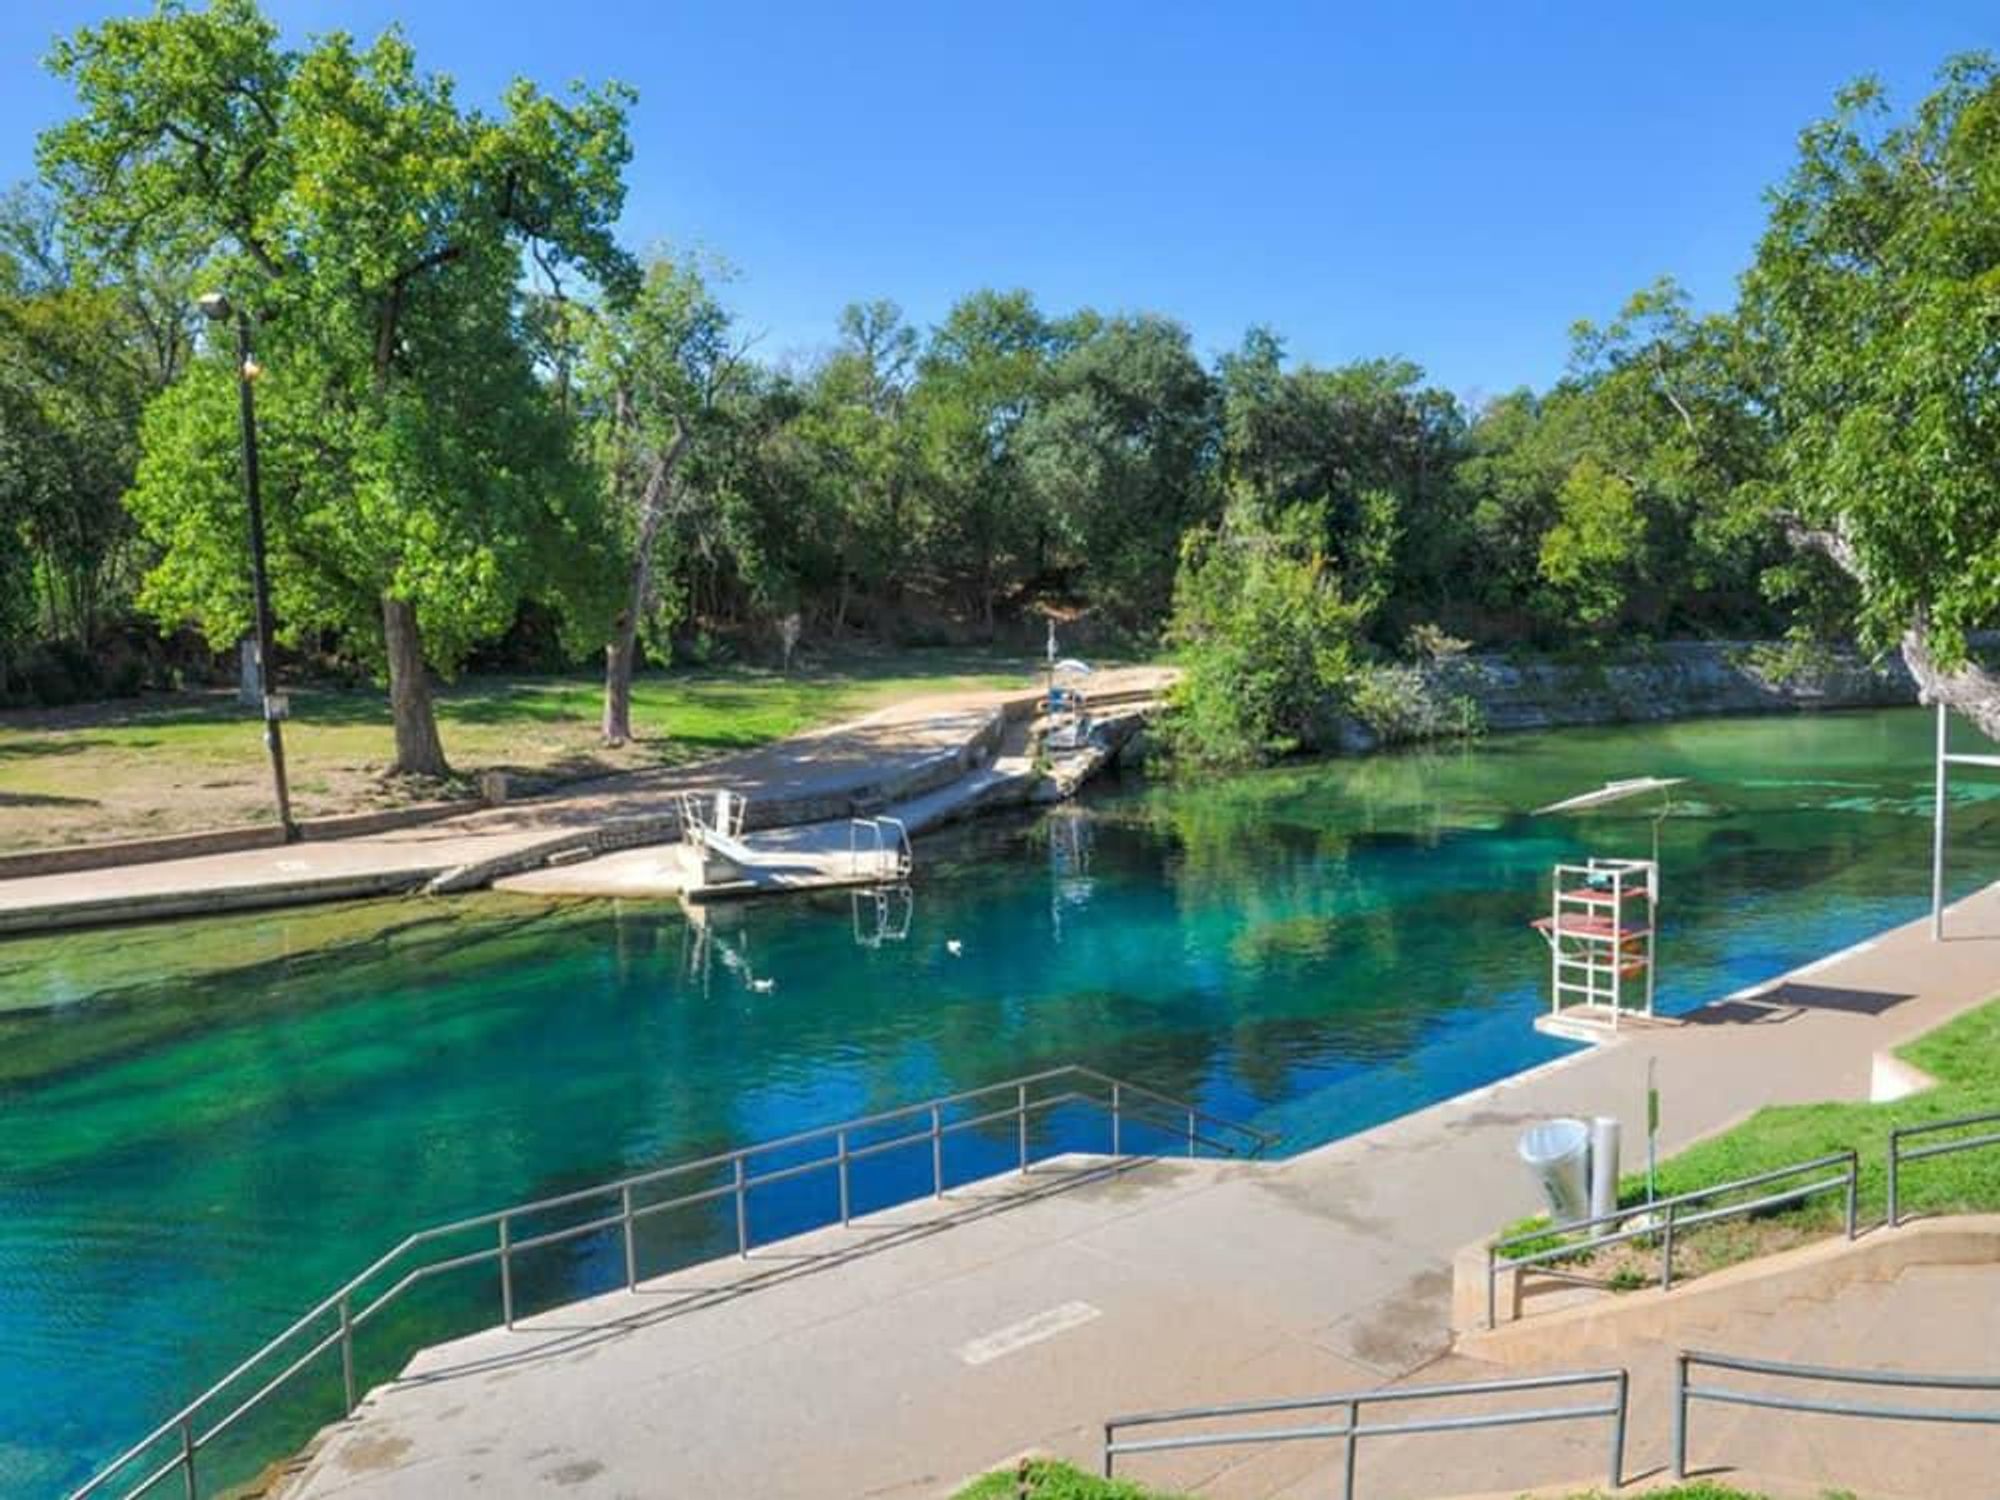 Barton Springs Pool during the day